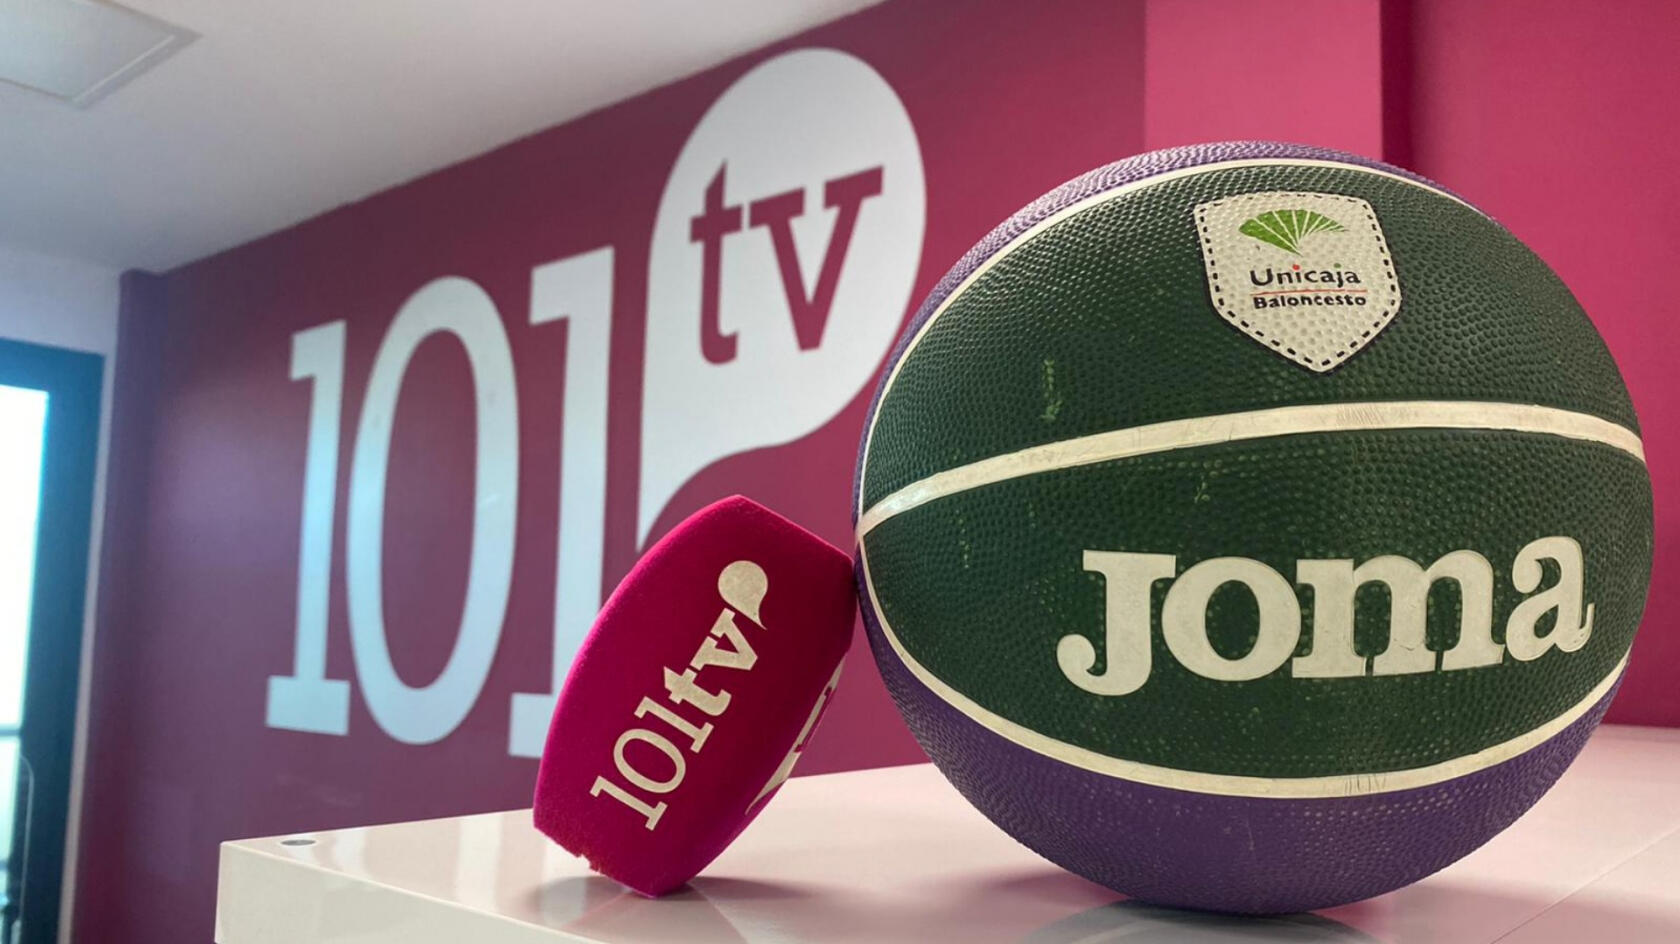 101 TV will broadcast Unicaja games in the BCL